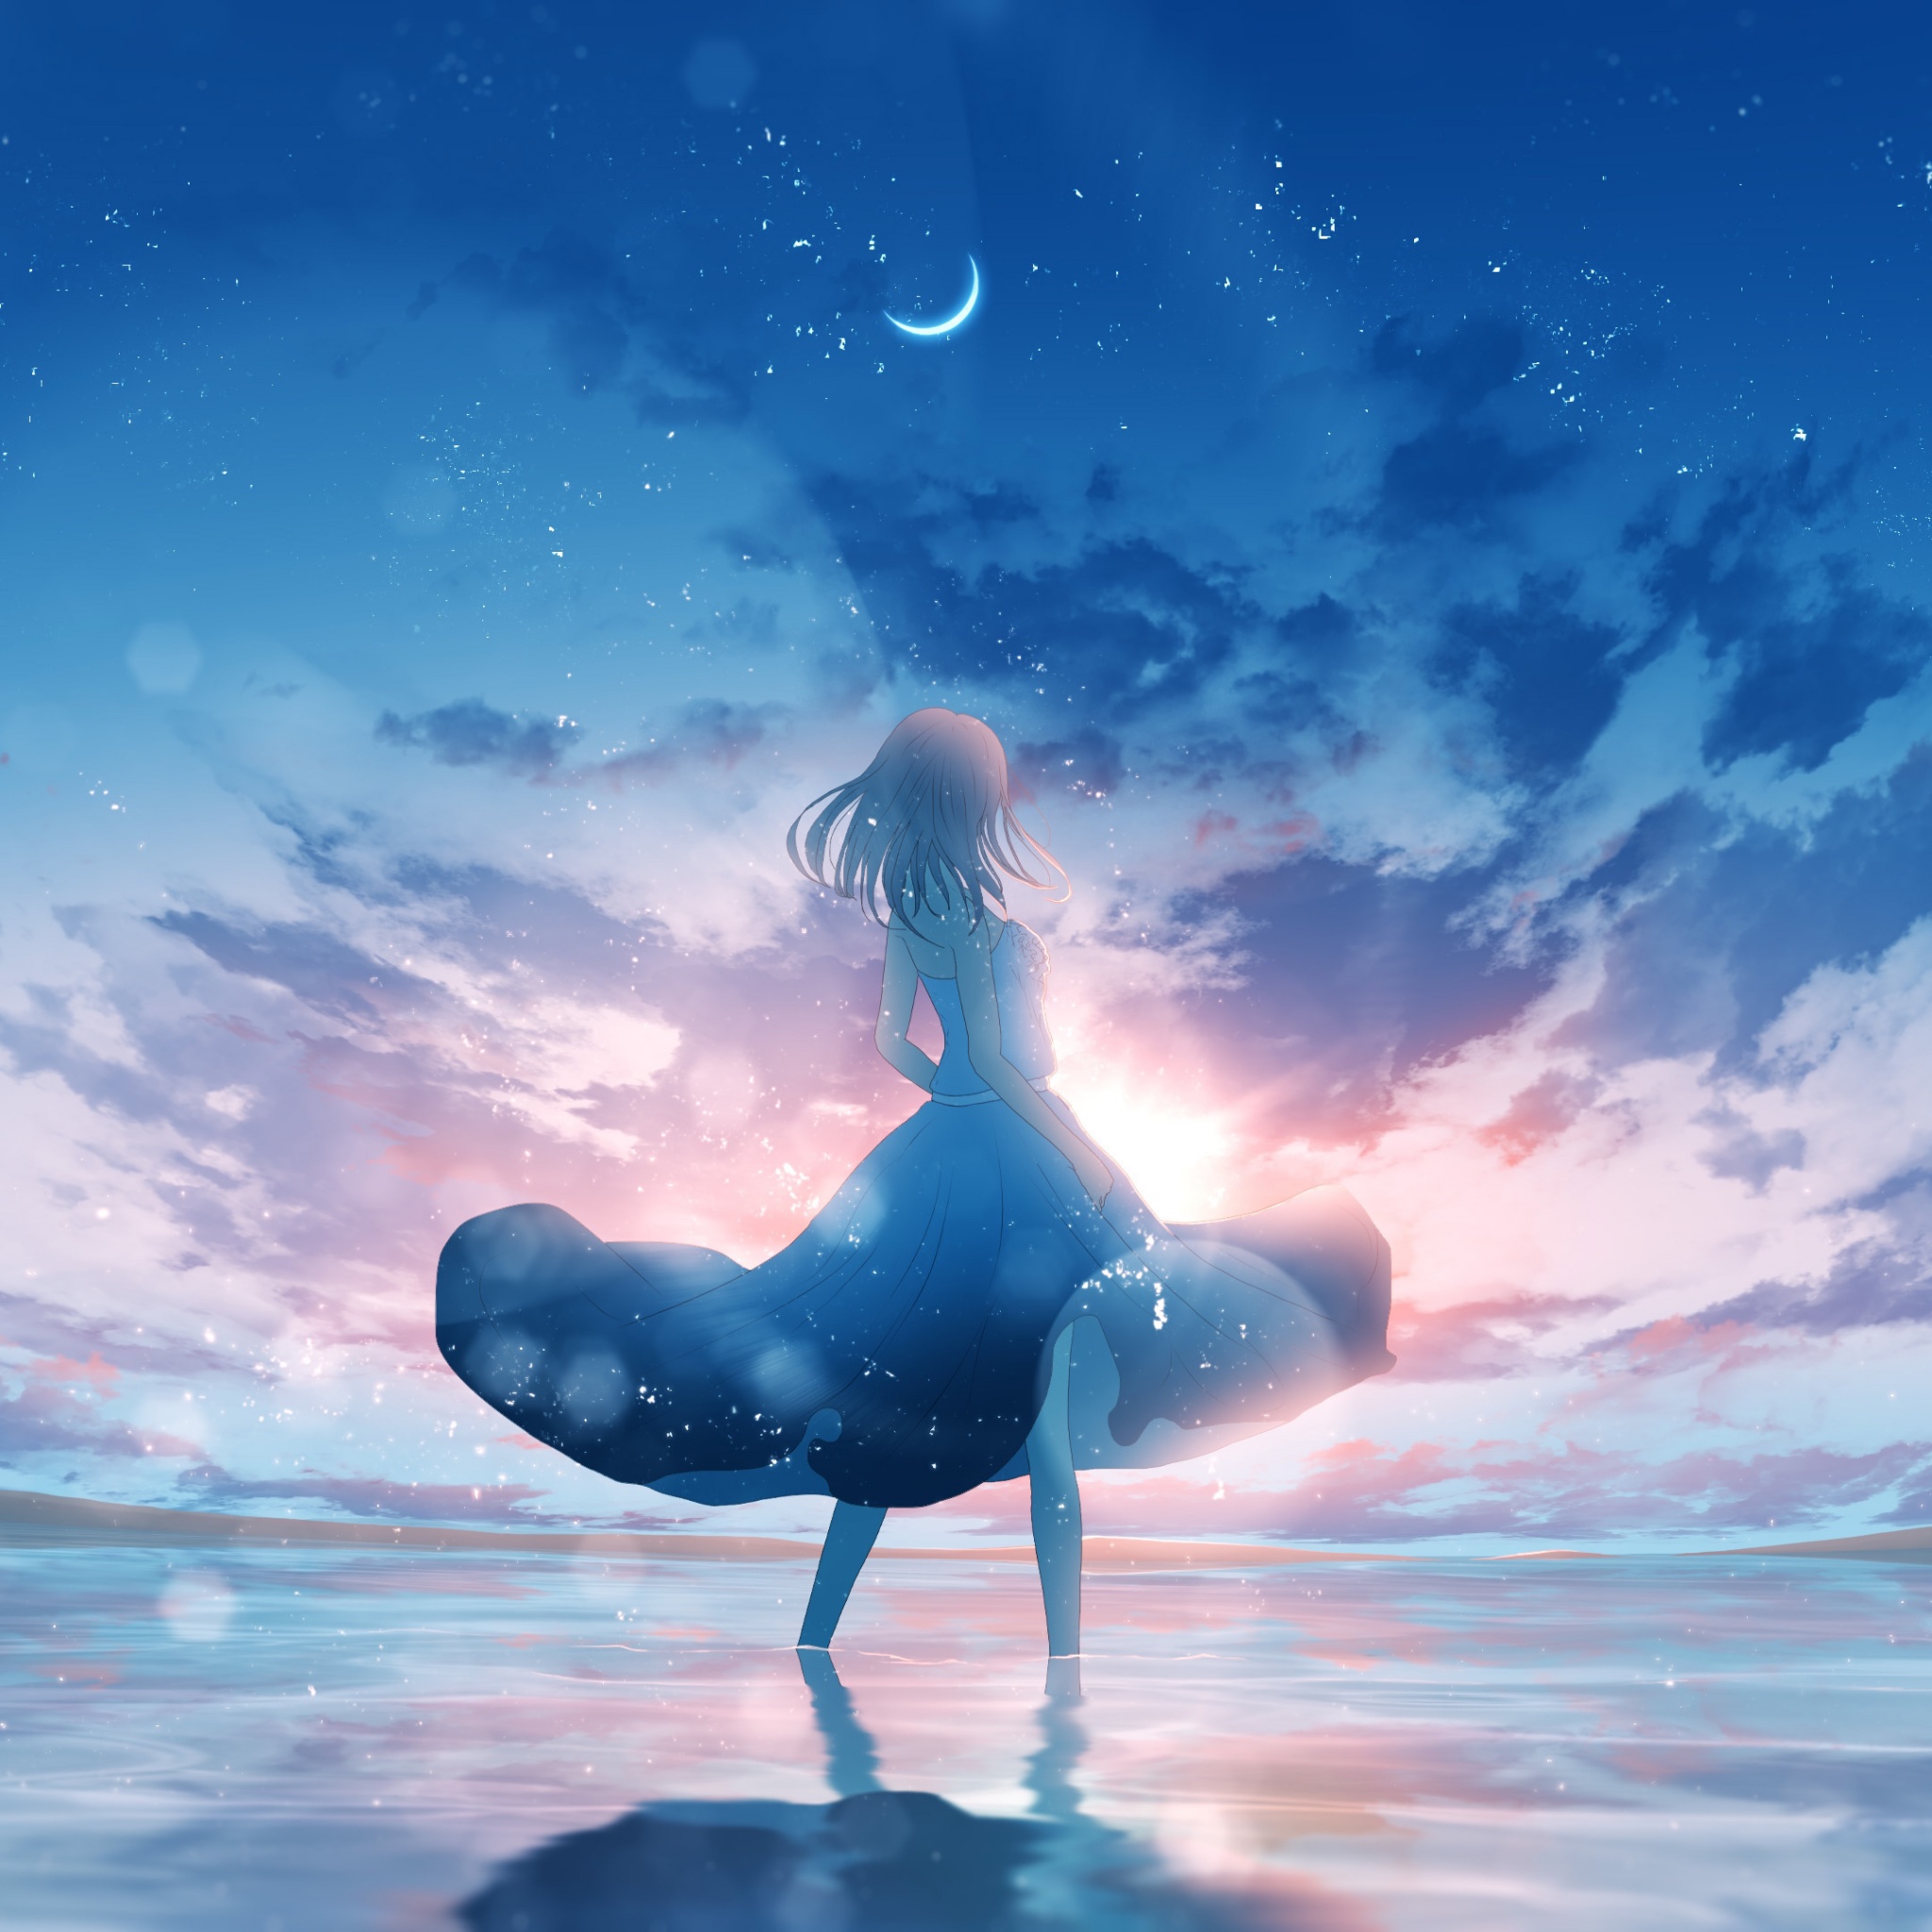 Aesthetic anime girl Wallpapers Download | MobCup